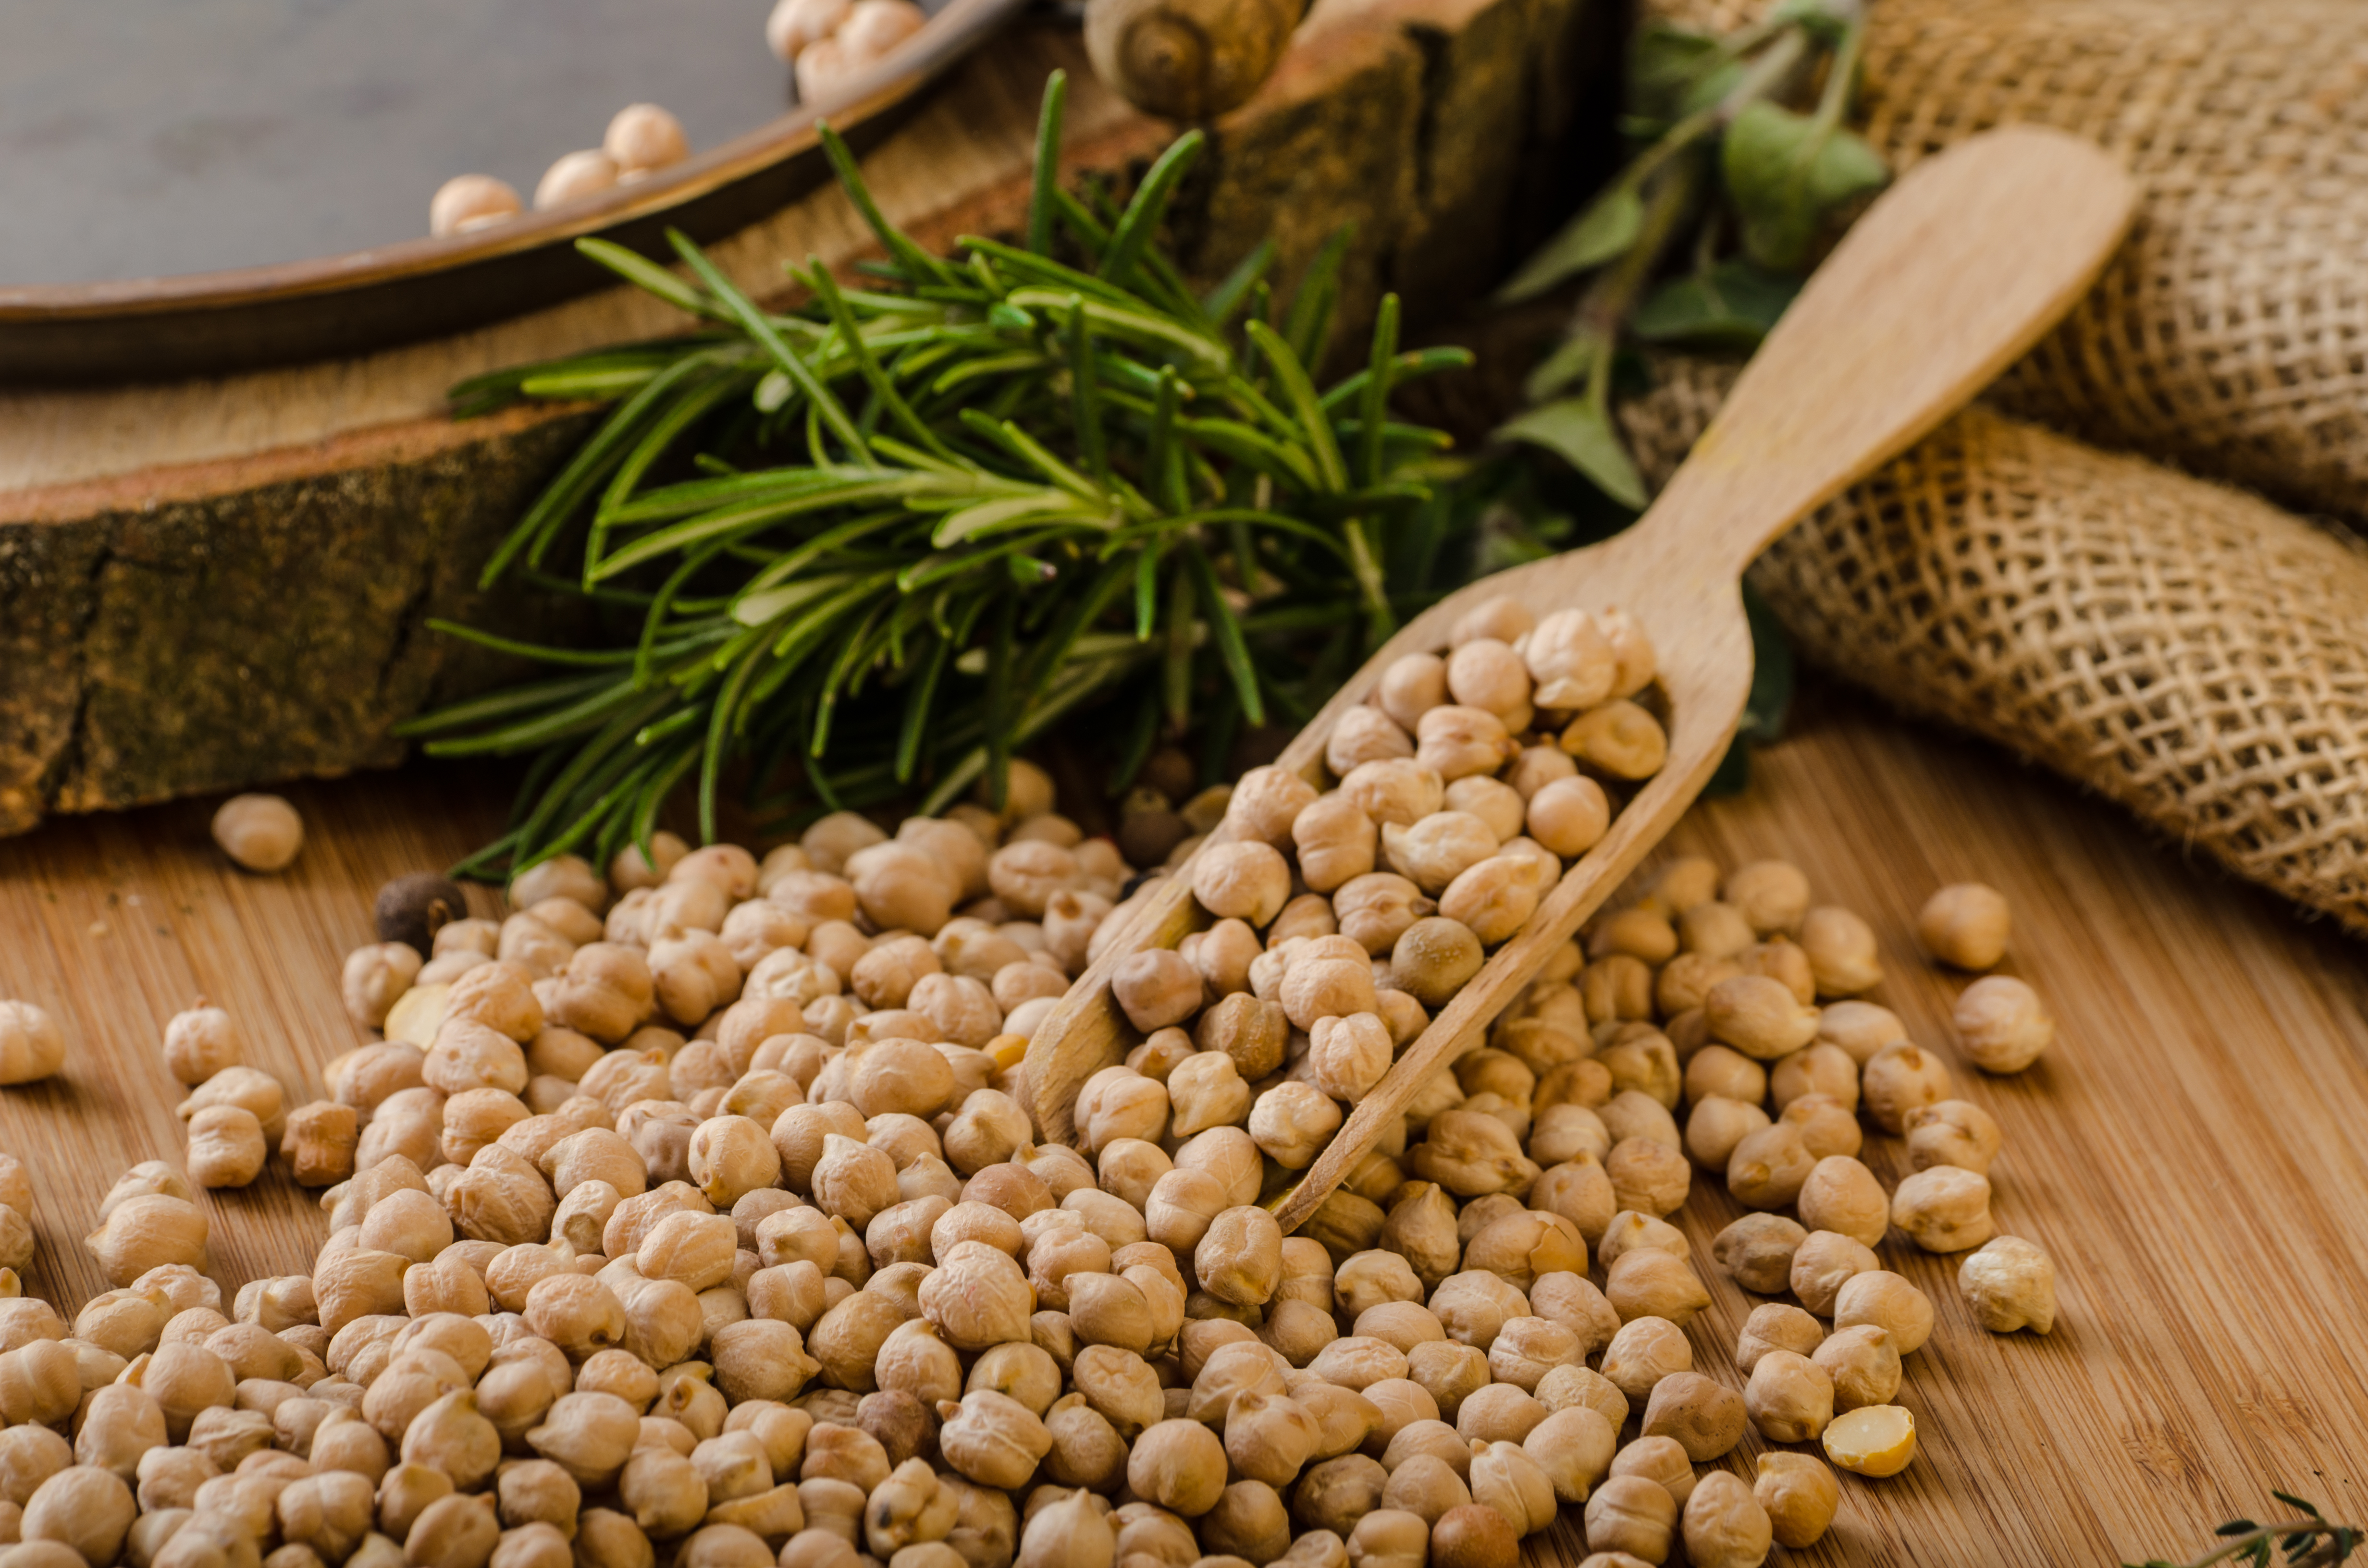 Raw and healthy chickpeas, Simple but delicious legume used in Middle Eastern cuisine